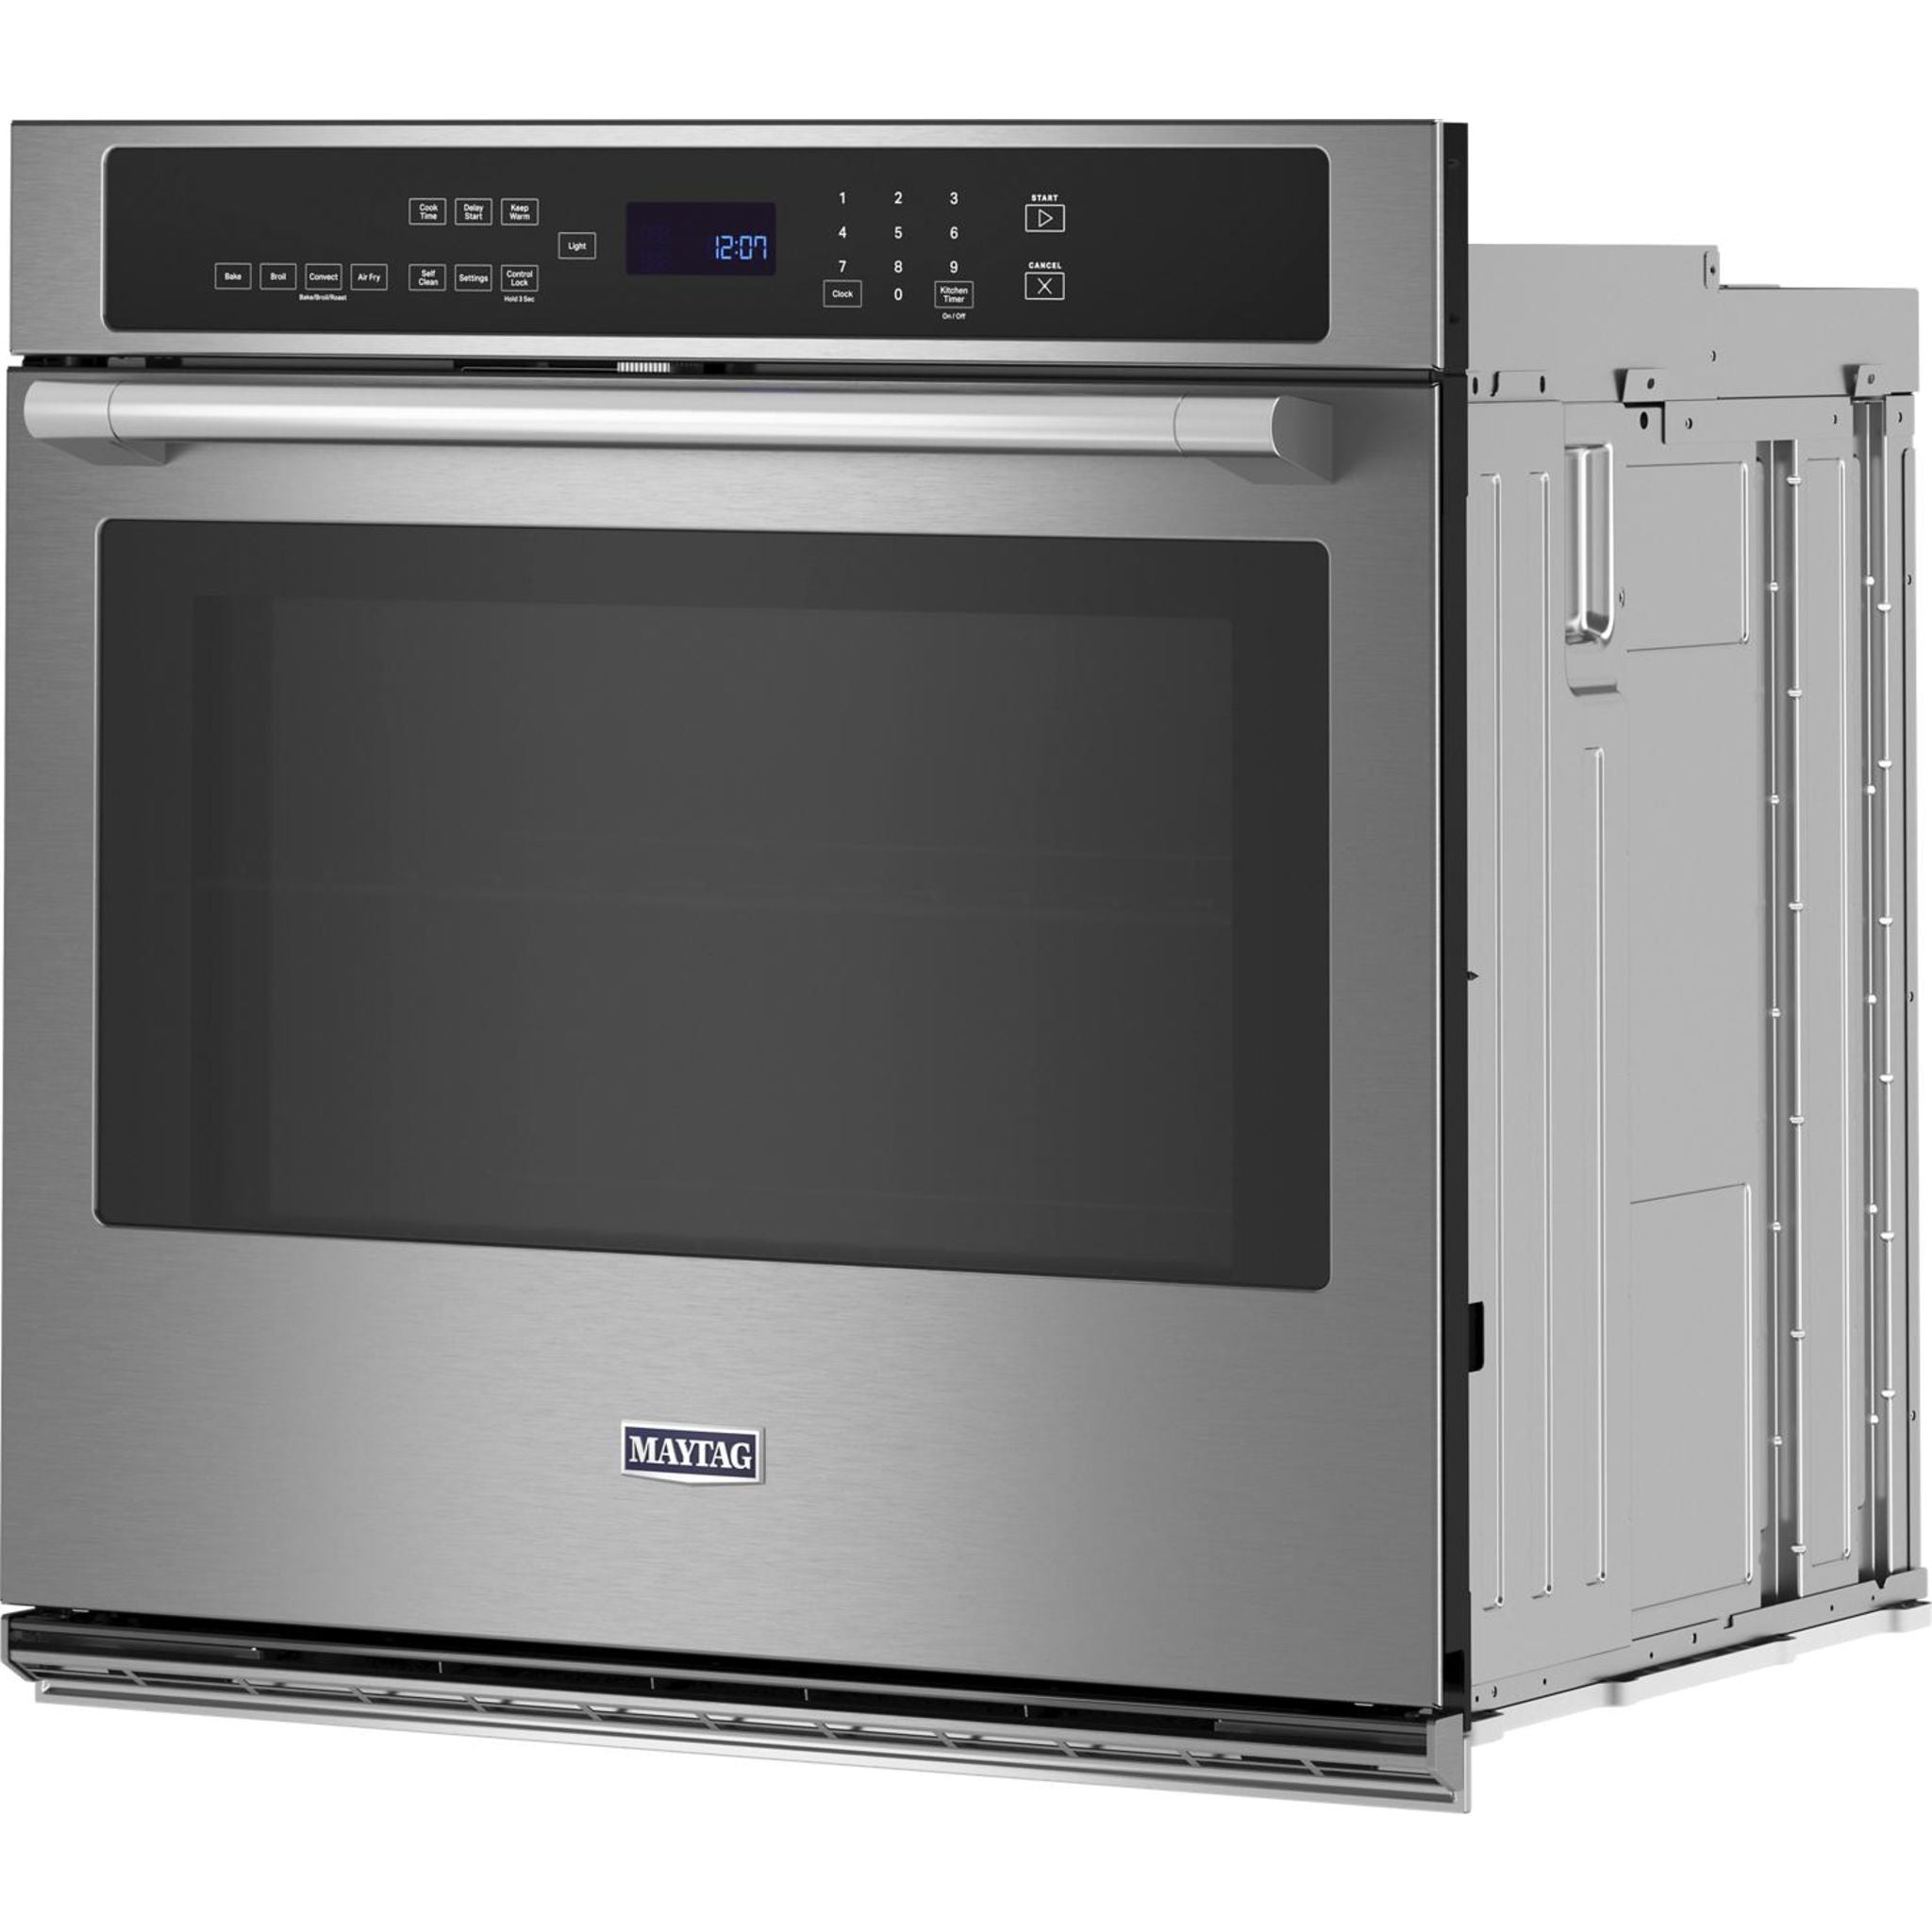 Maytag, Maytag 30" Convection Wall Oven (MOES6030LZ) - Fingerprint Resistant Stainless Steel